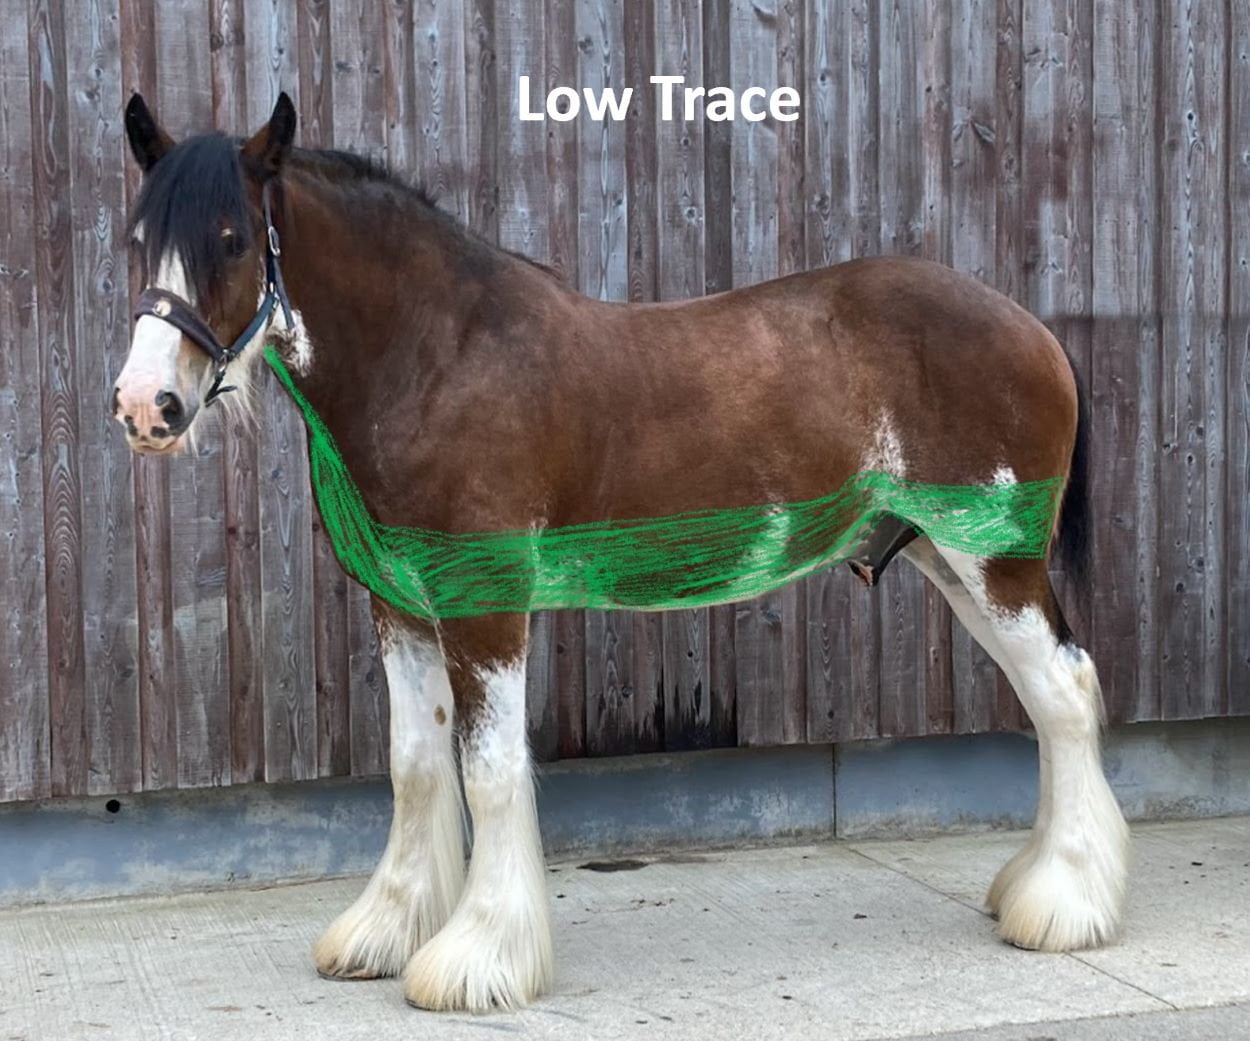 Clydesdale displaying a low trace clip